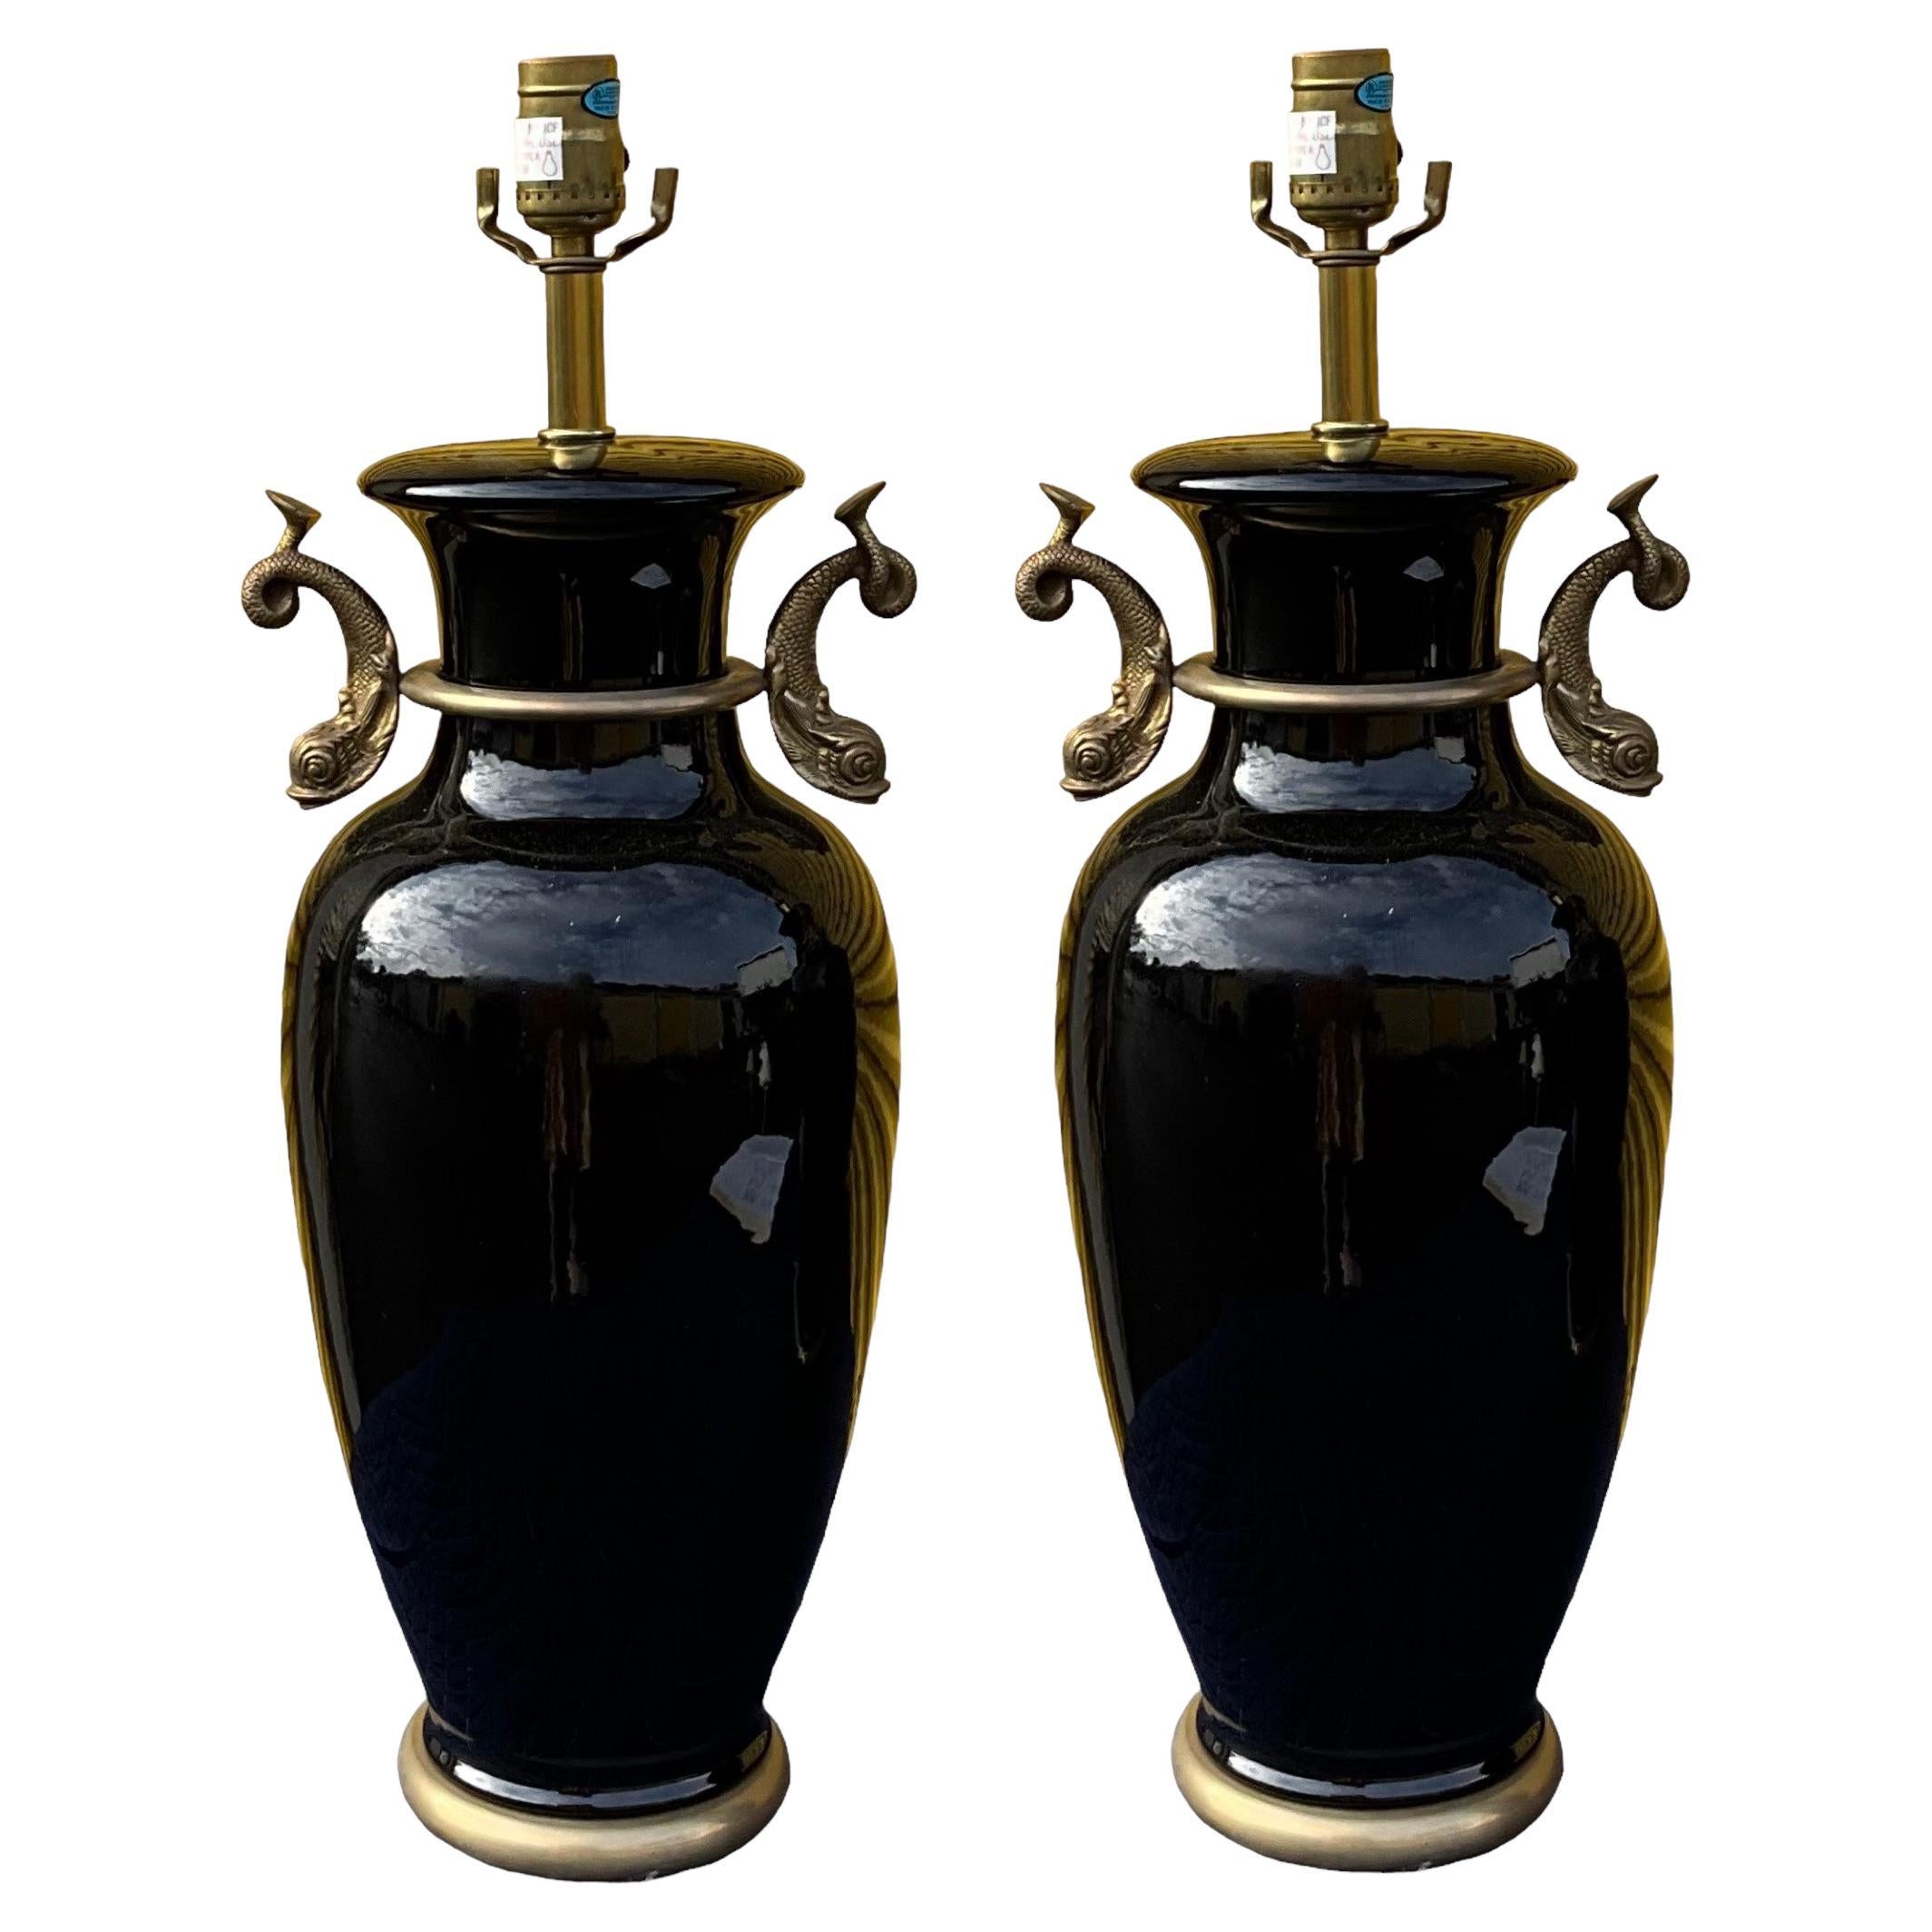 This is a pair of black neo-classical lamps with gilt dolphins by Frederick Cooper. They are in working order and very good condition.